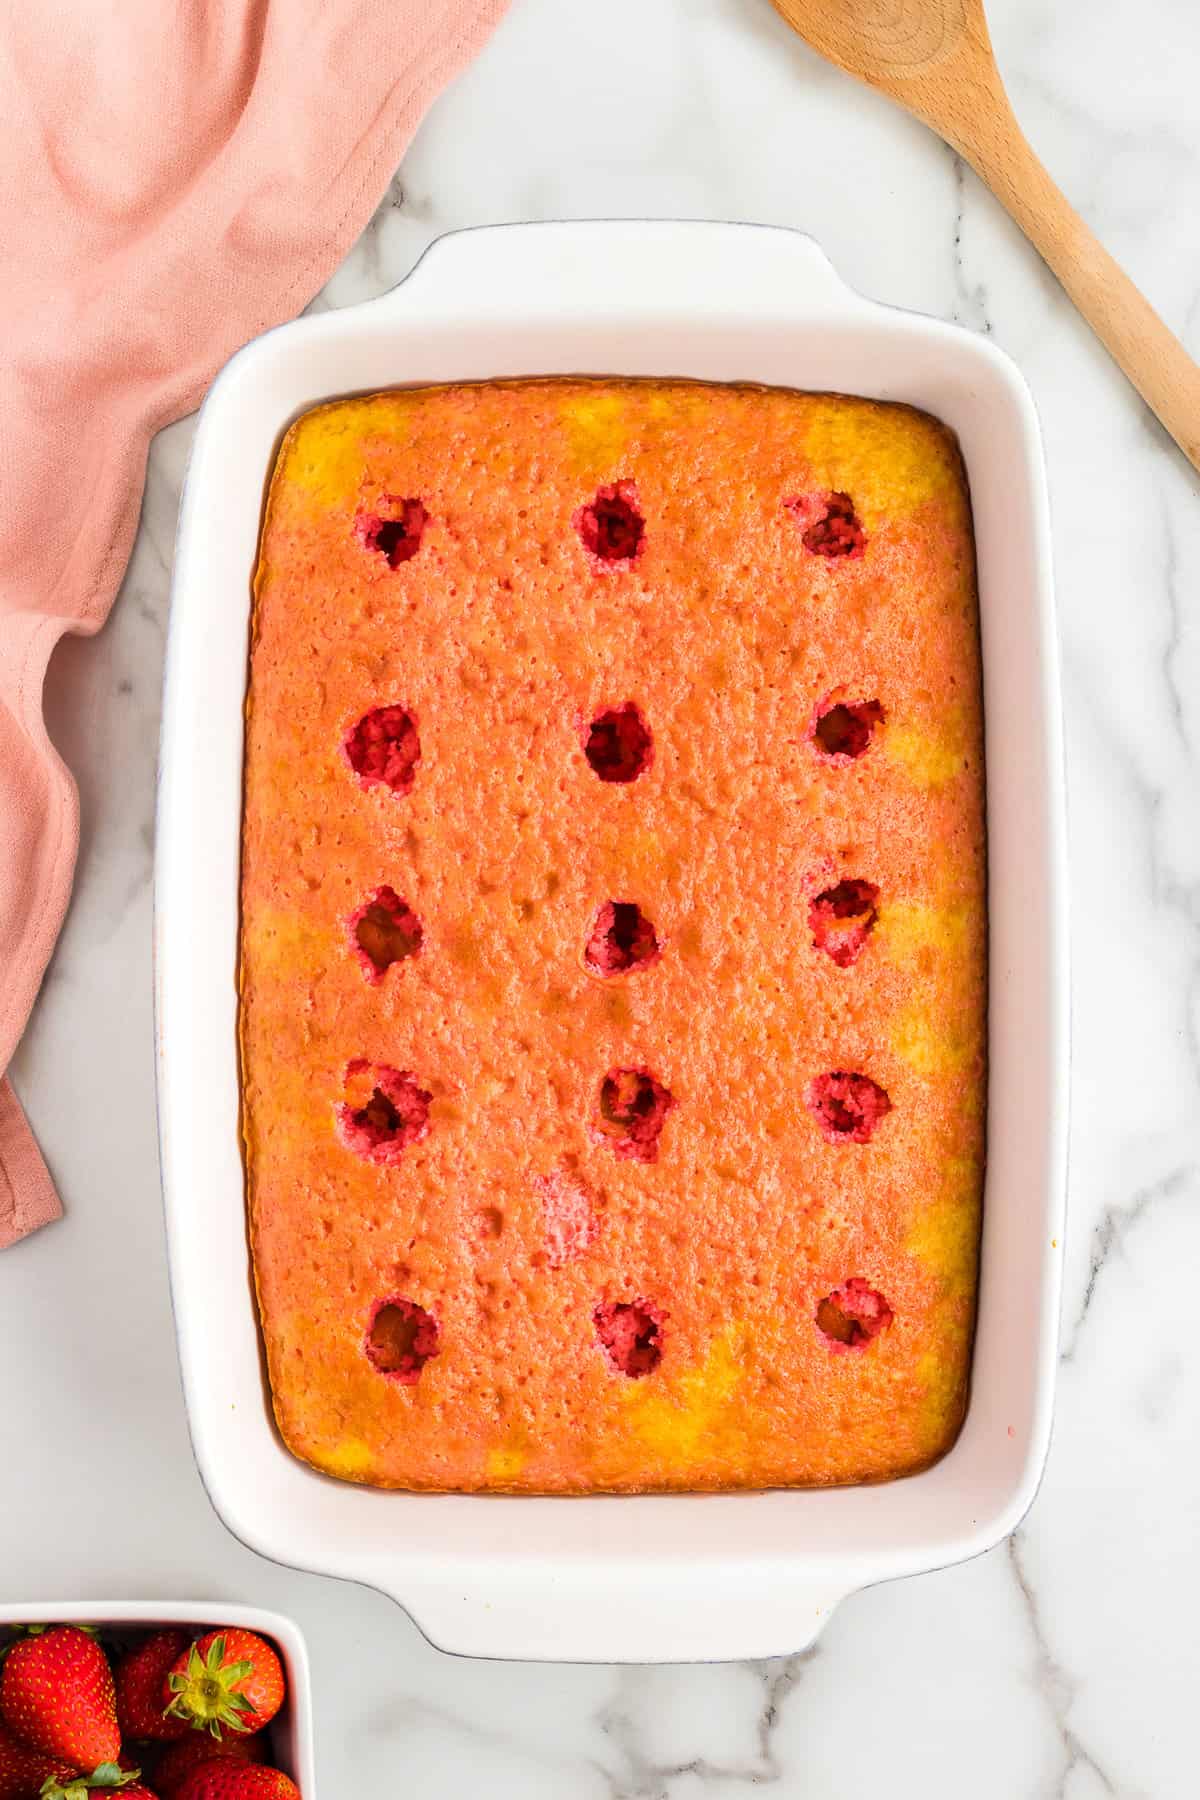 Poke cake with strawberry jello poured over it